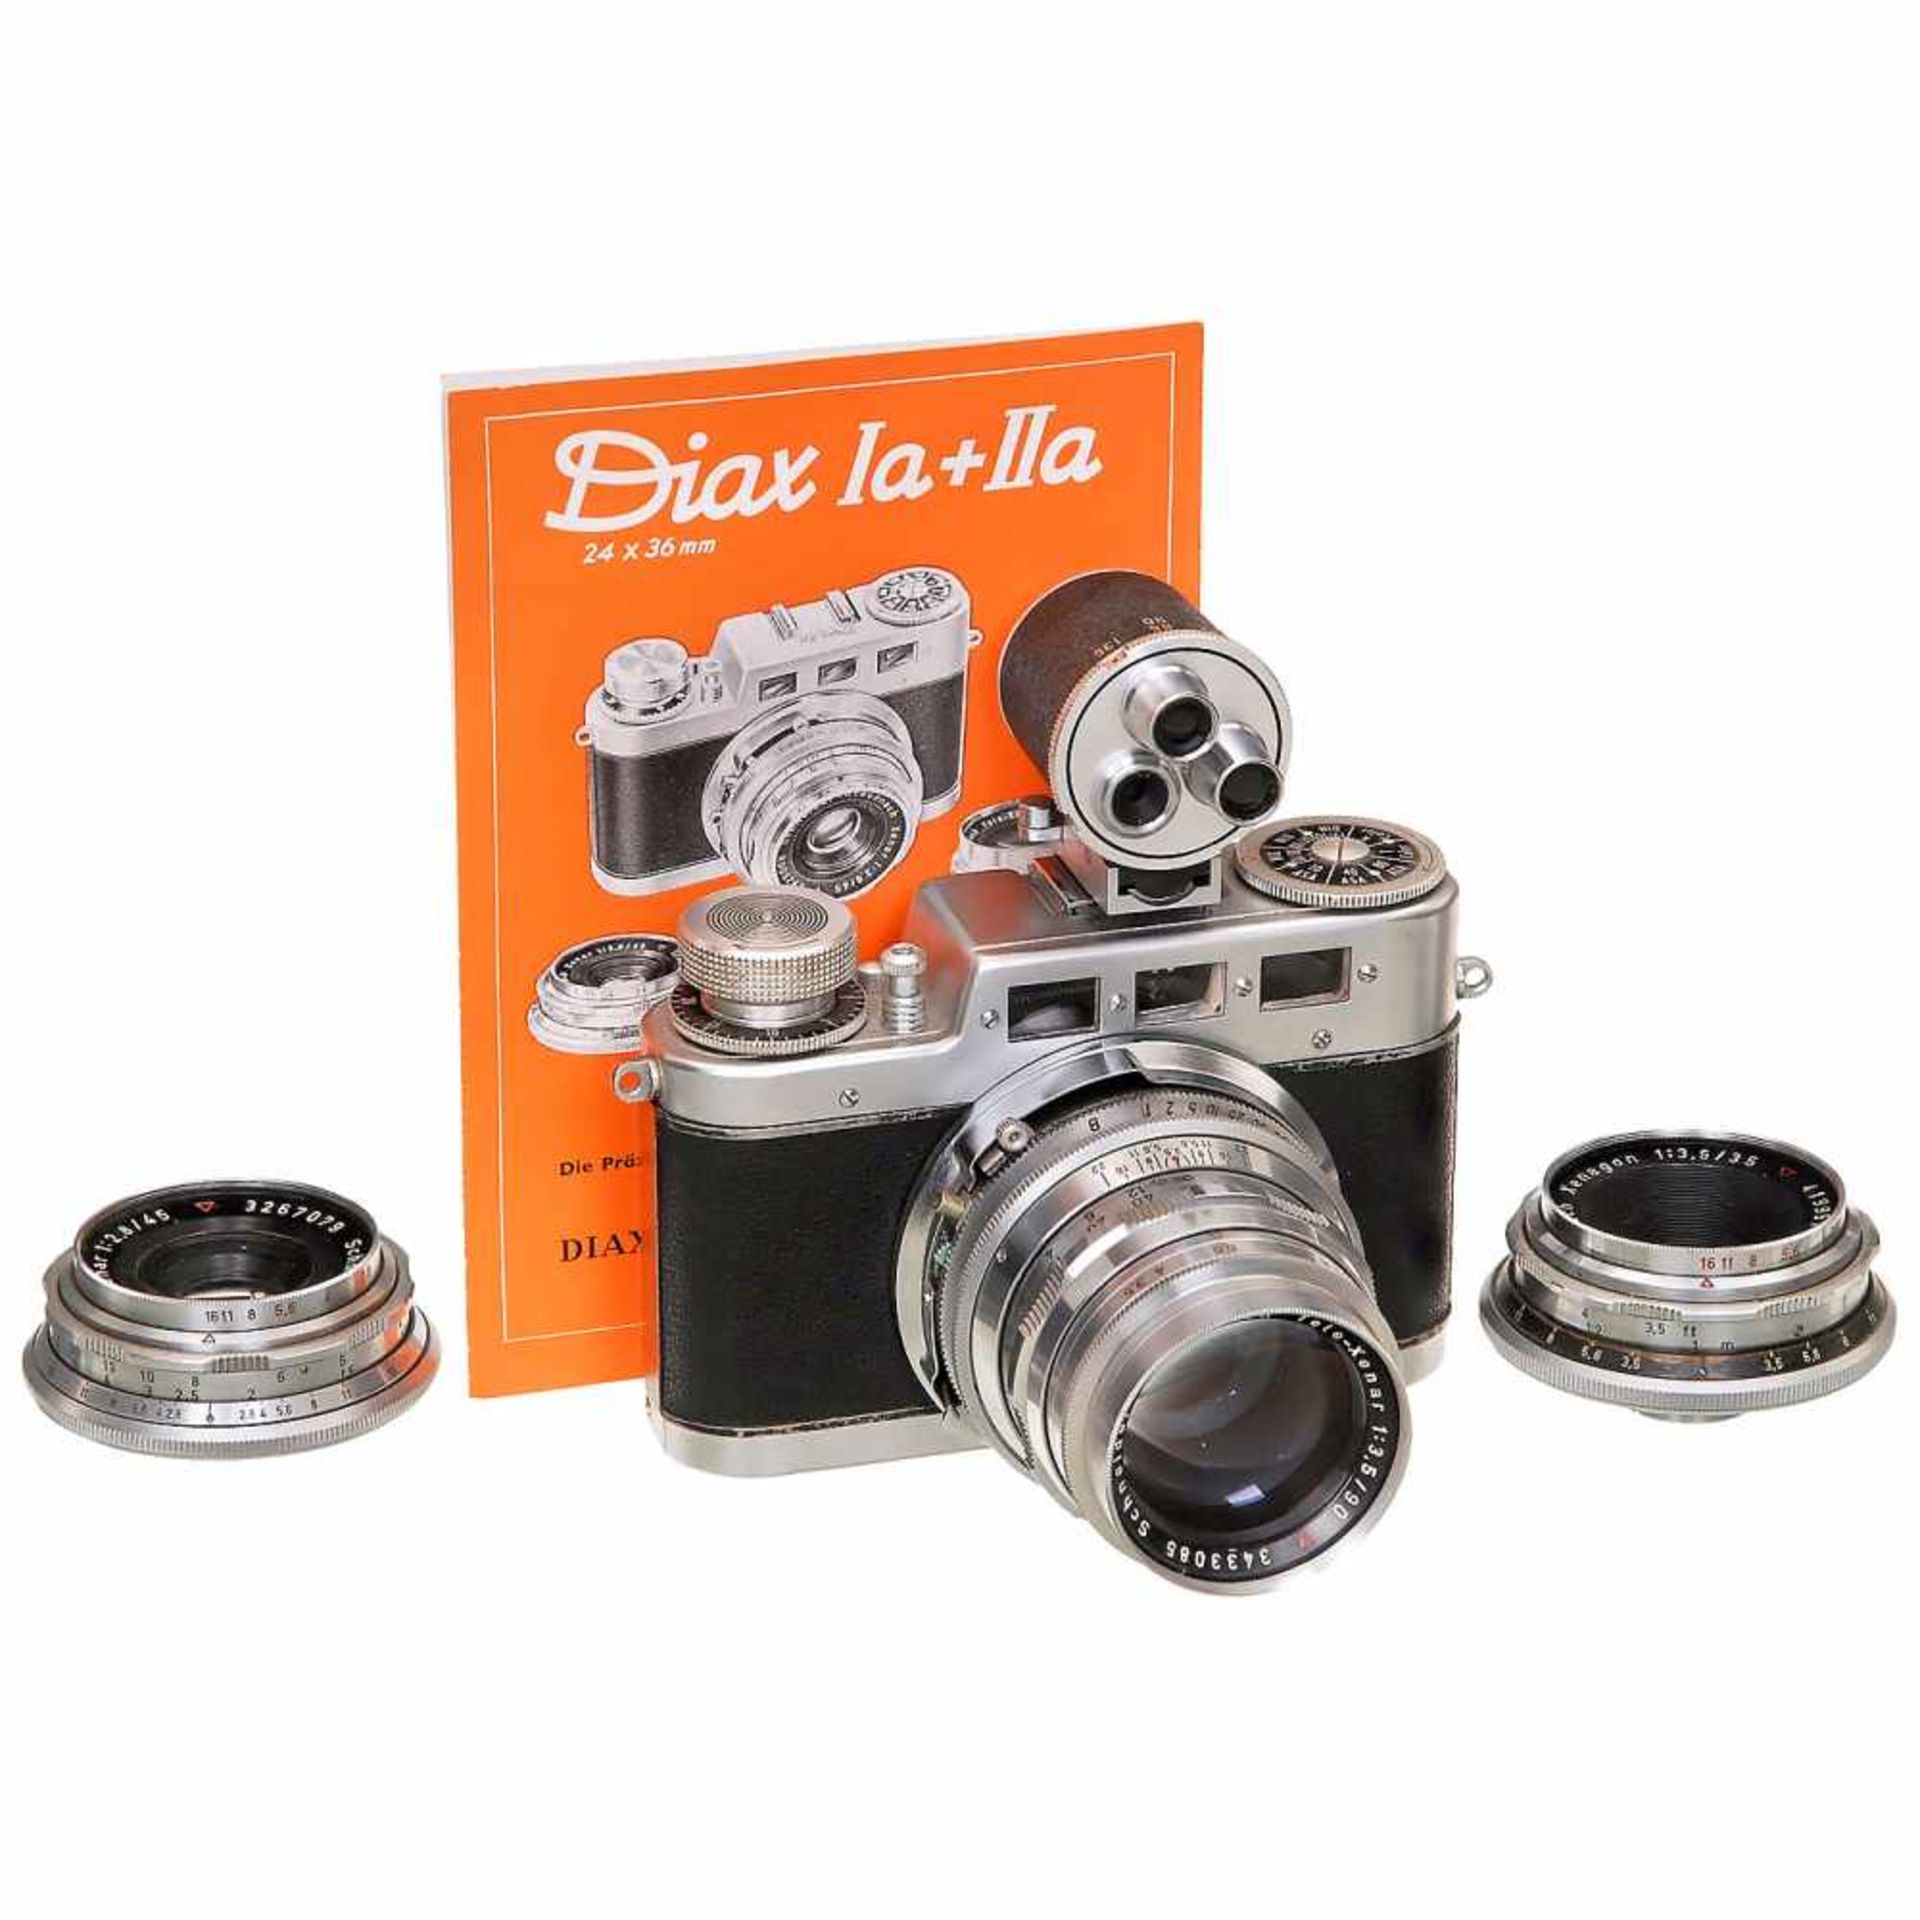 Diax Ia Outfit, 1952Voss. Ulm. Diax Ia, no. 63797, 3 viewfinders, with 3 lenses: Xenagon 3,5/35